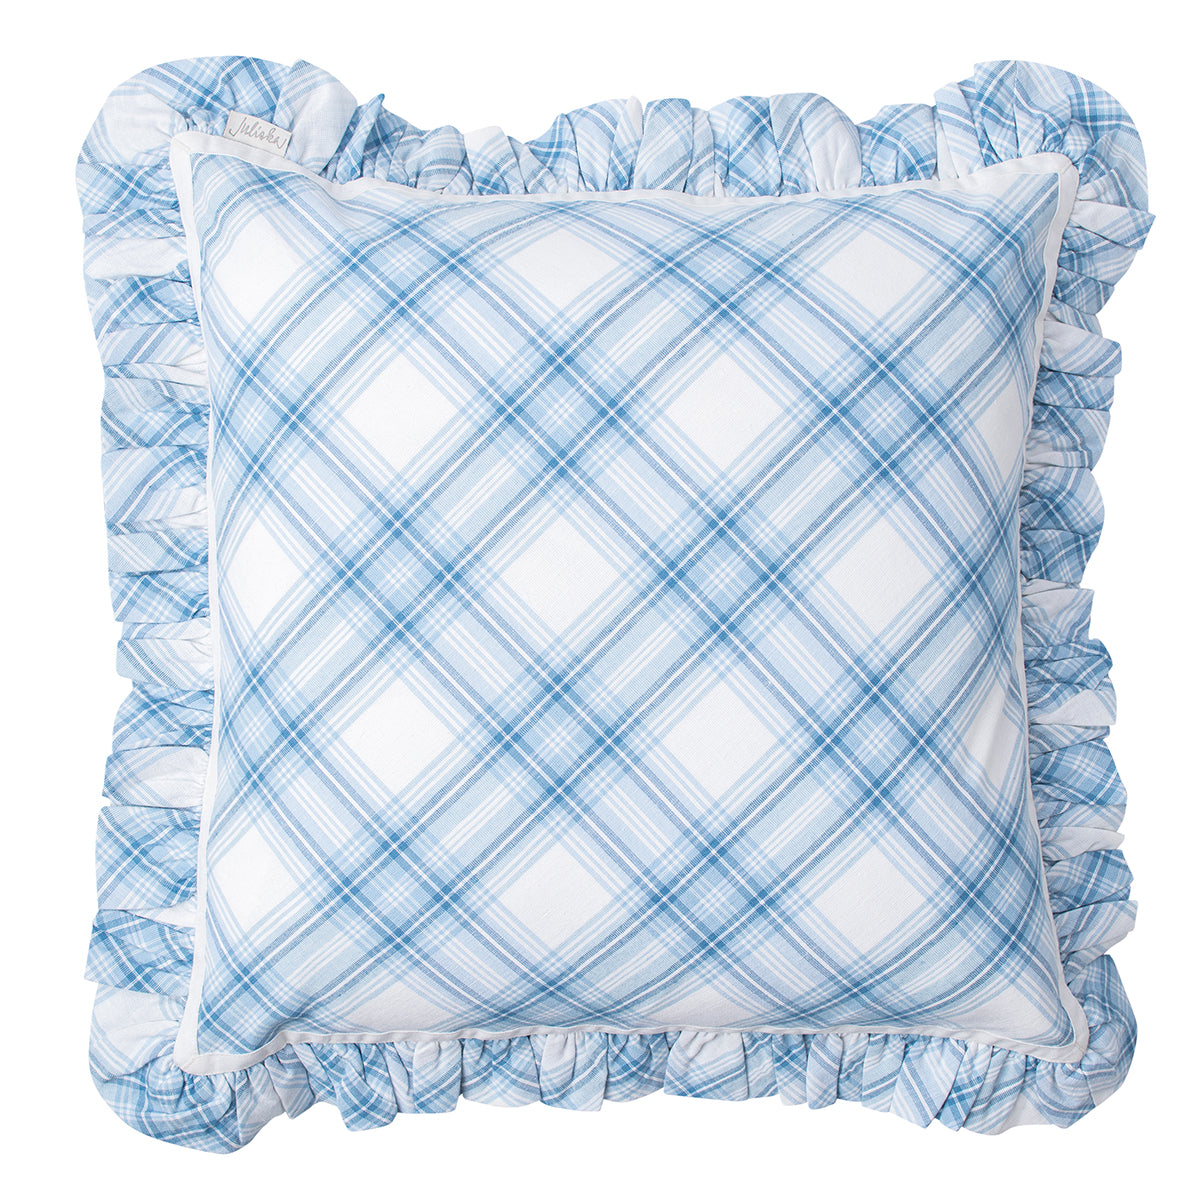 Accent your living room, bedrooms or sitting room with classic Tartan in soft, Chambray blue hue! This 18-inch plaid pillow with a romantic ruffle border will bring a welcome amount of whimsy to every room.